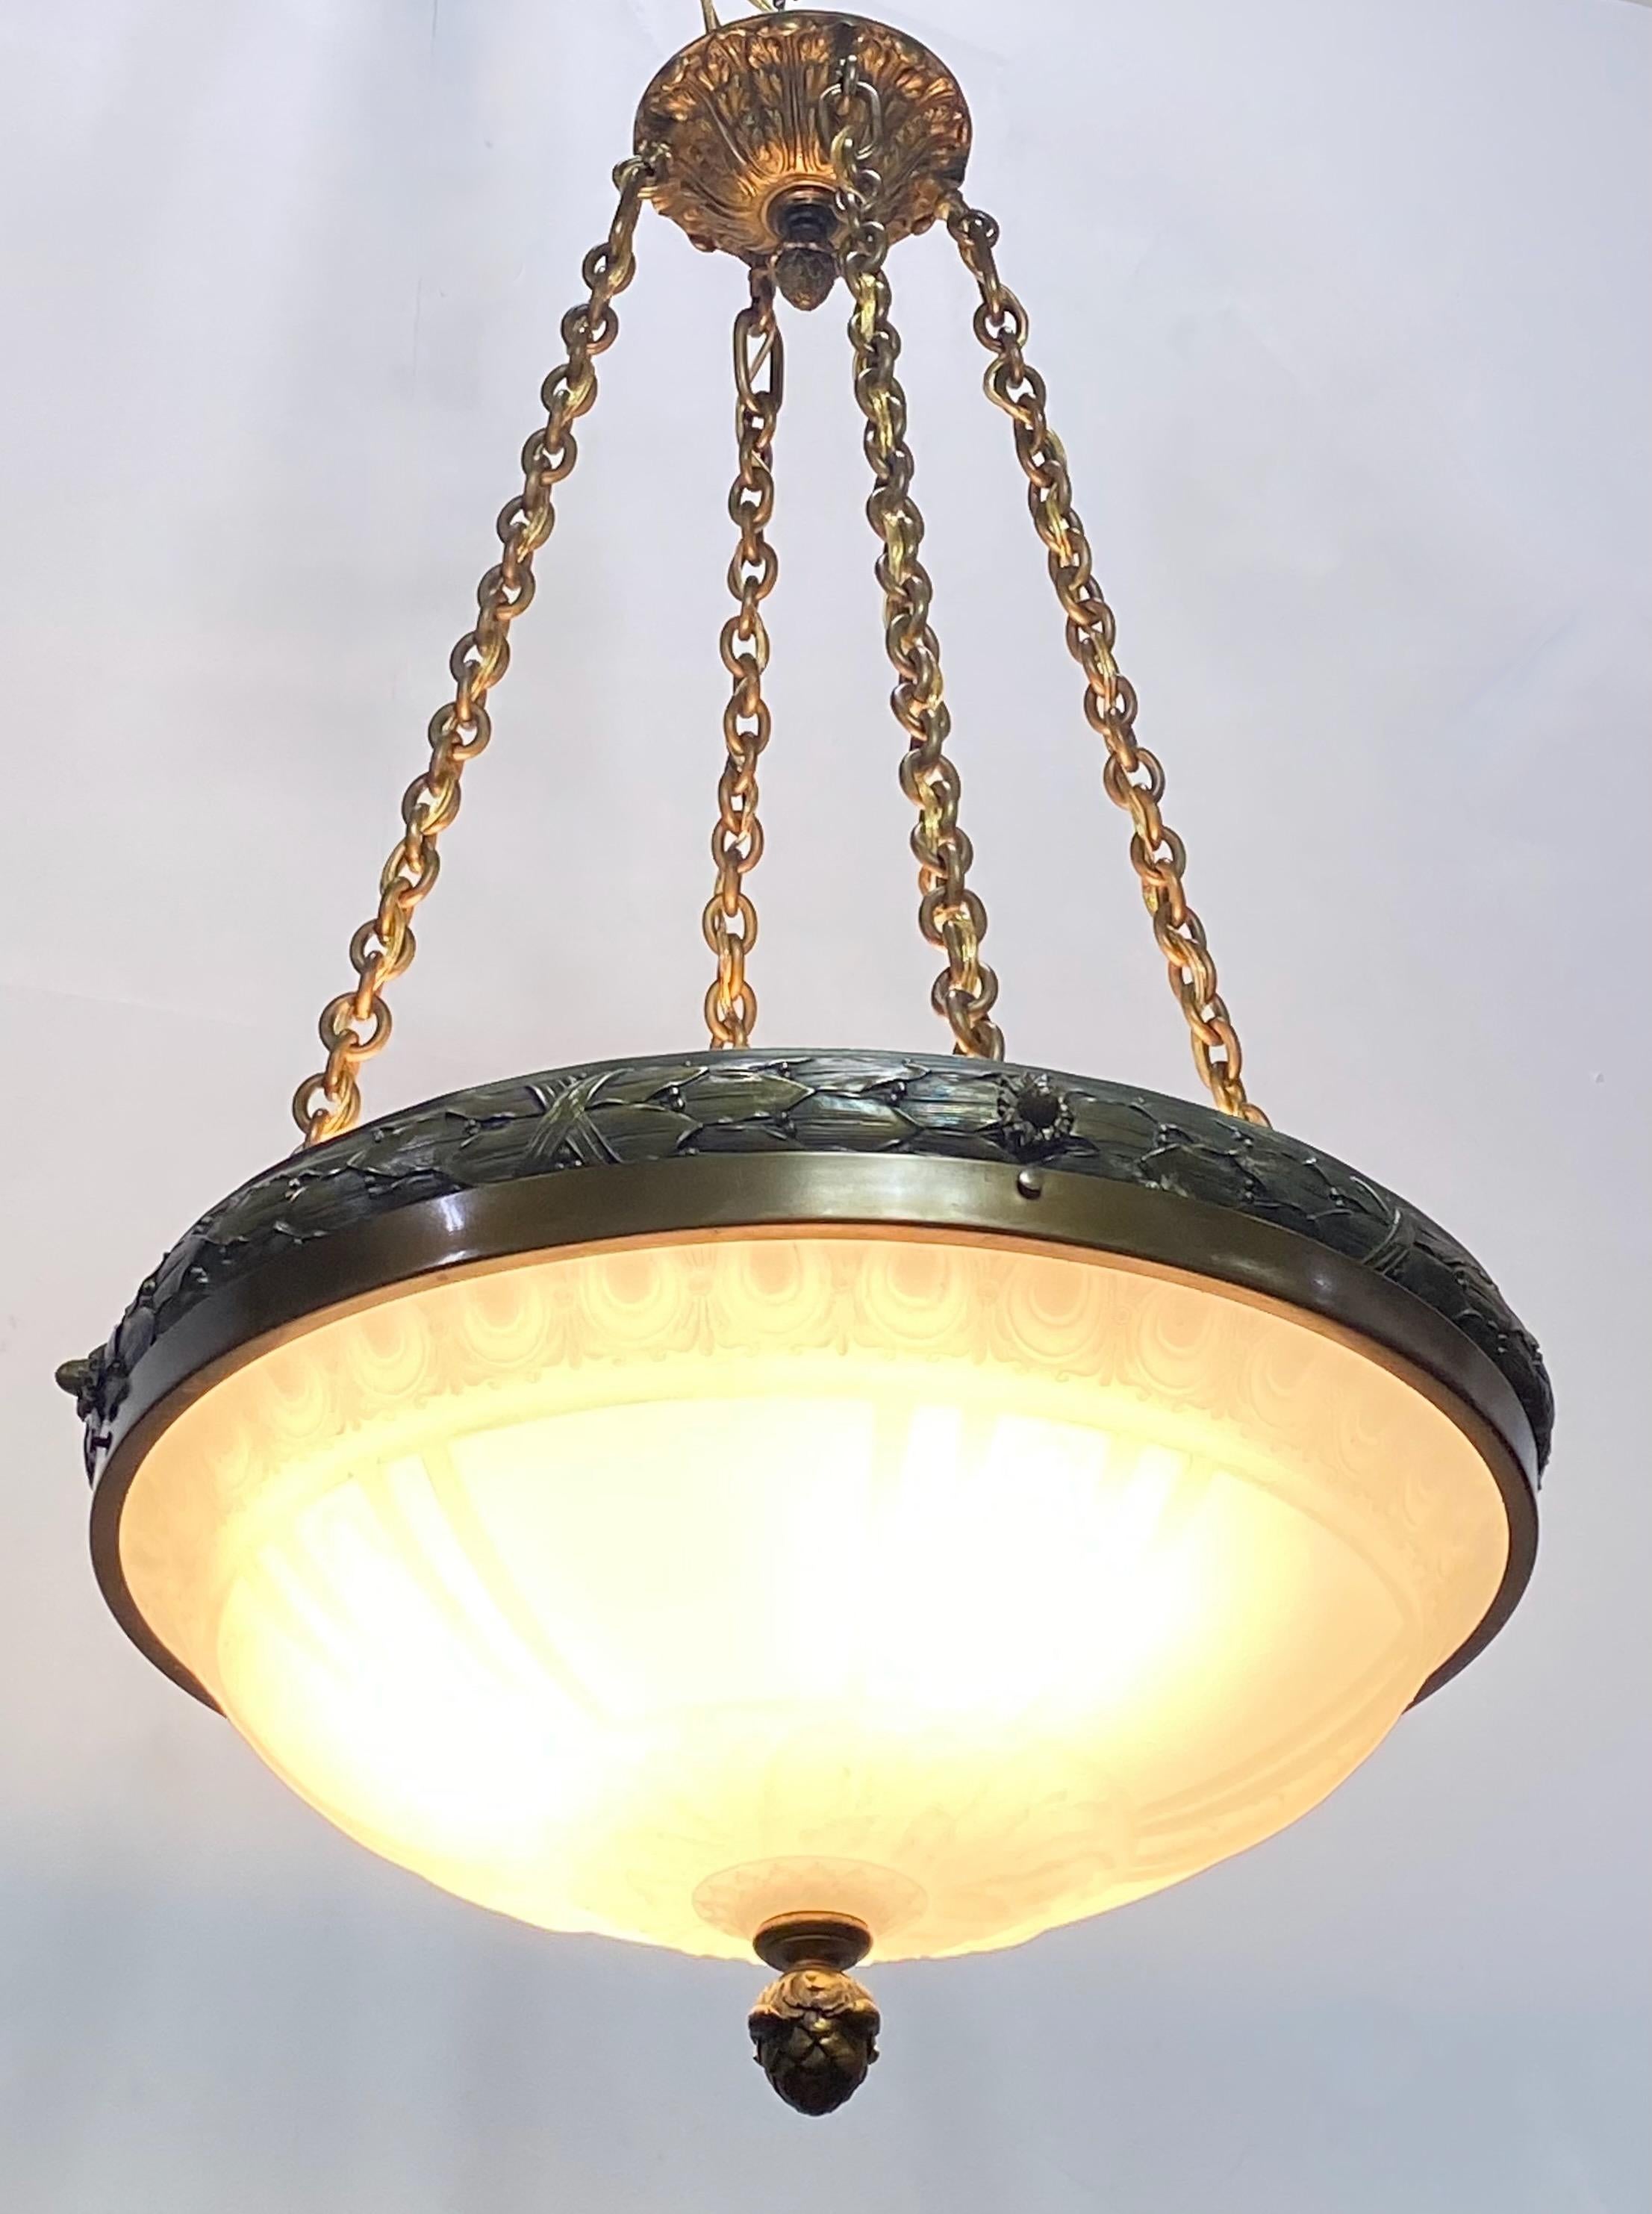 20th Century Neoclassical Style Glass and Brass Light Fixture, American circa 1915